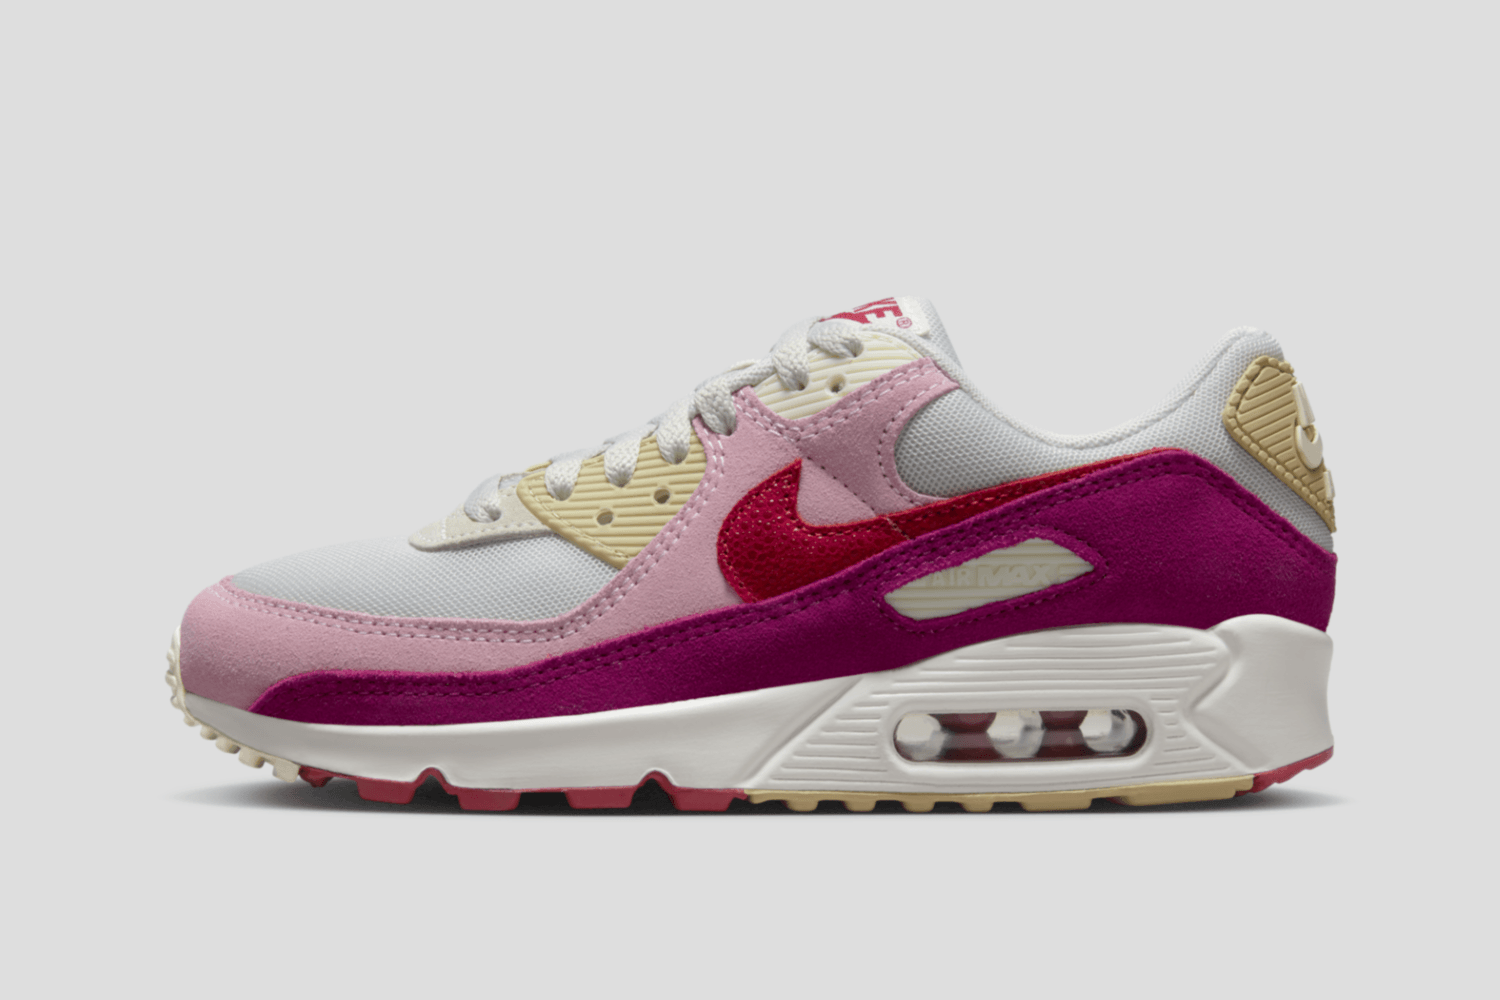 Score the Nike Air Max 90 WMNS 'Medium Soft Pink' now at Nike!